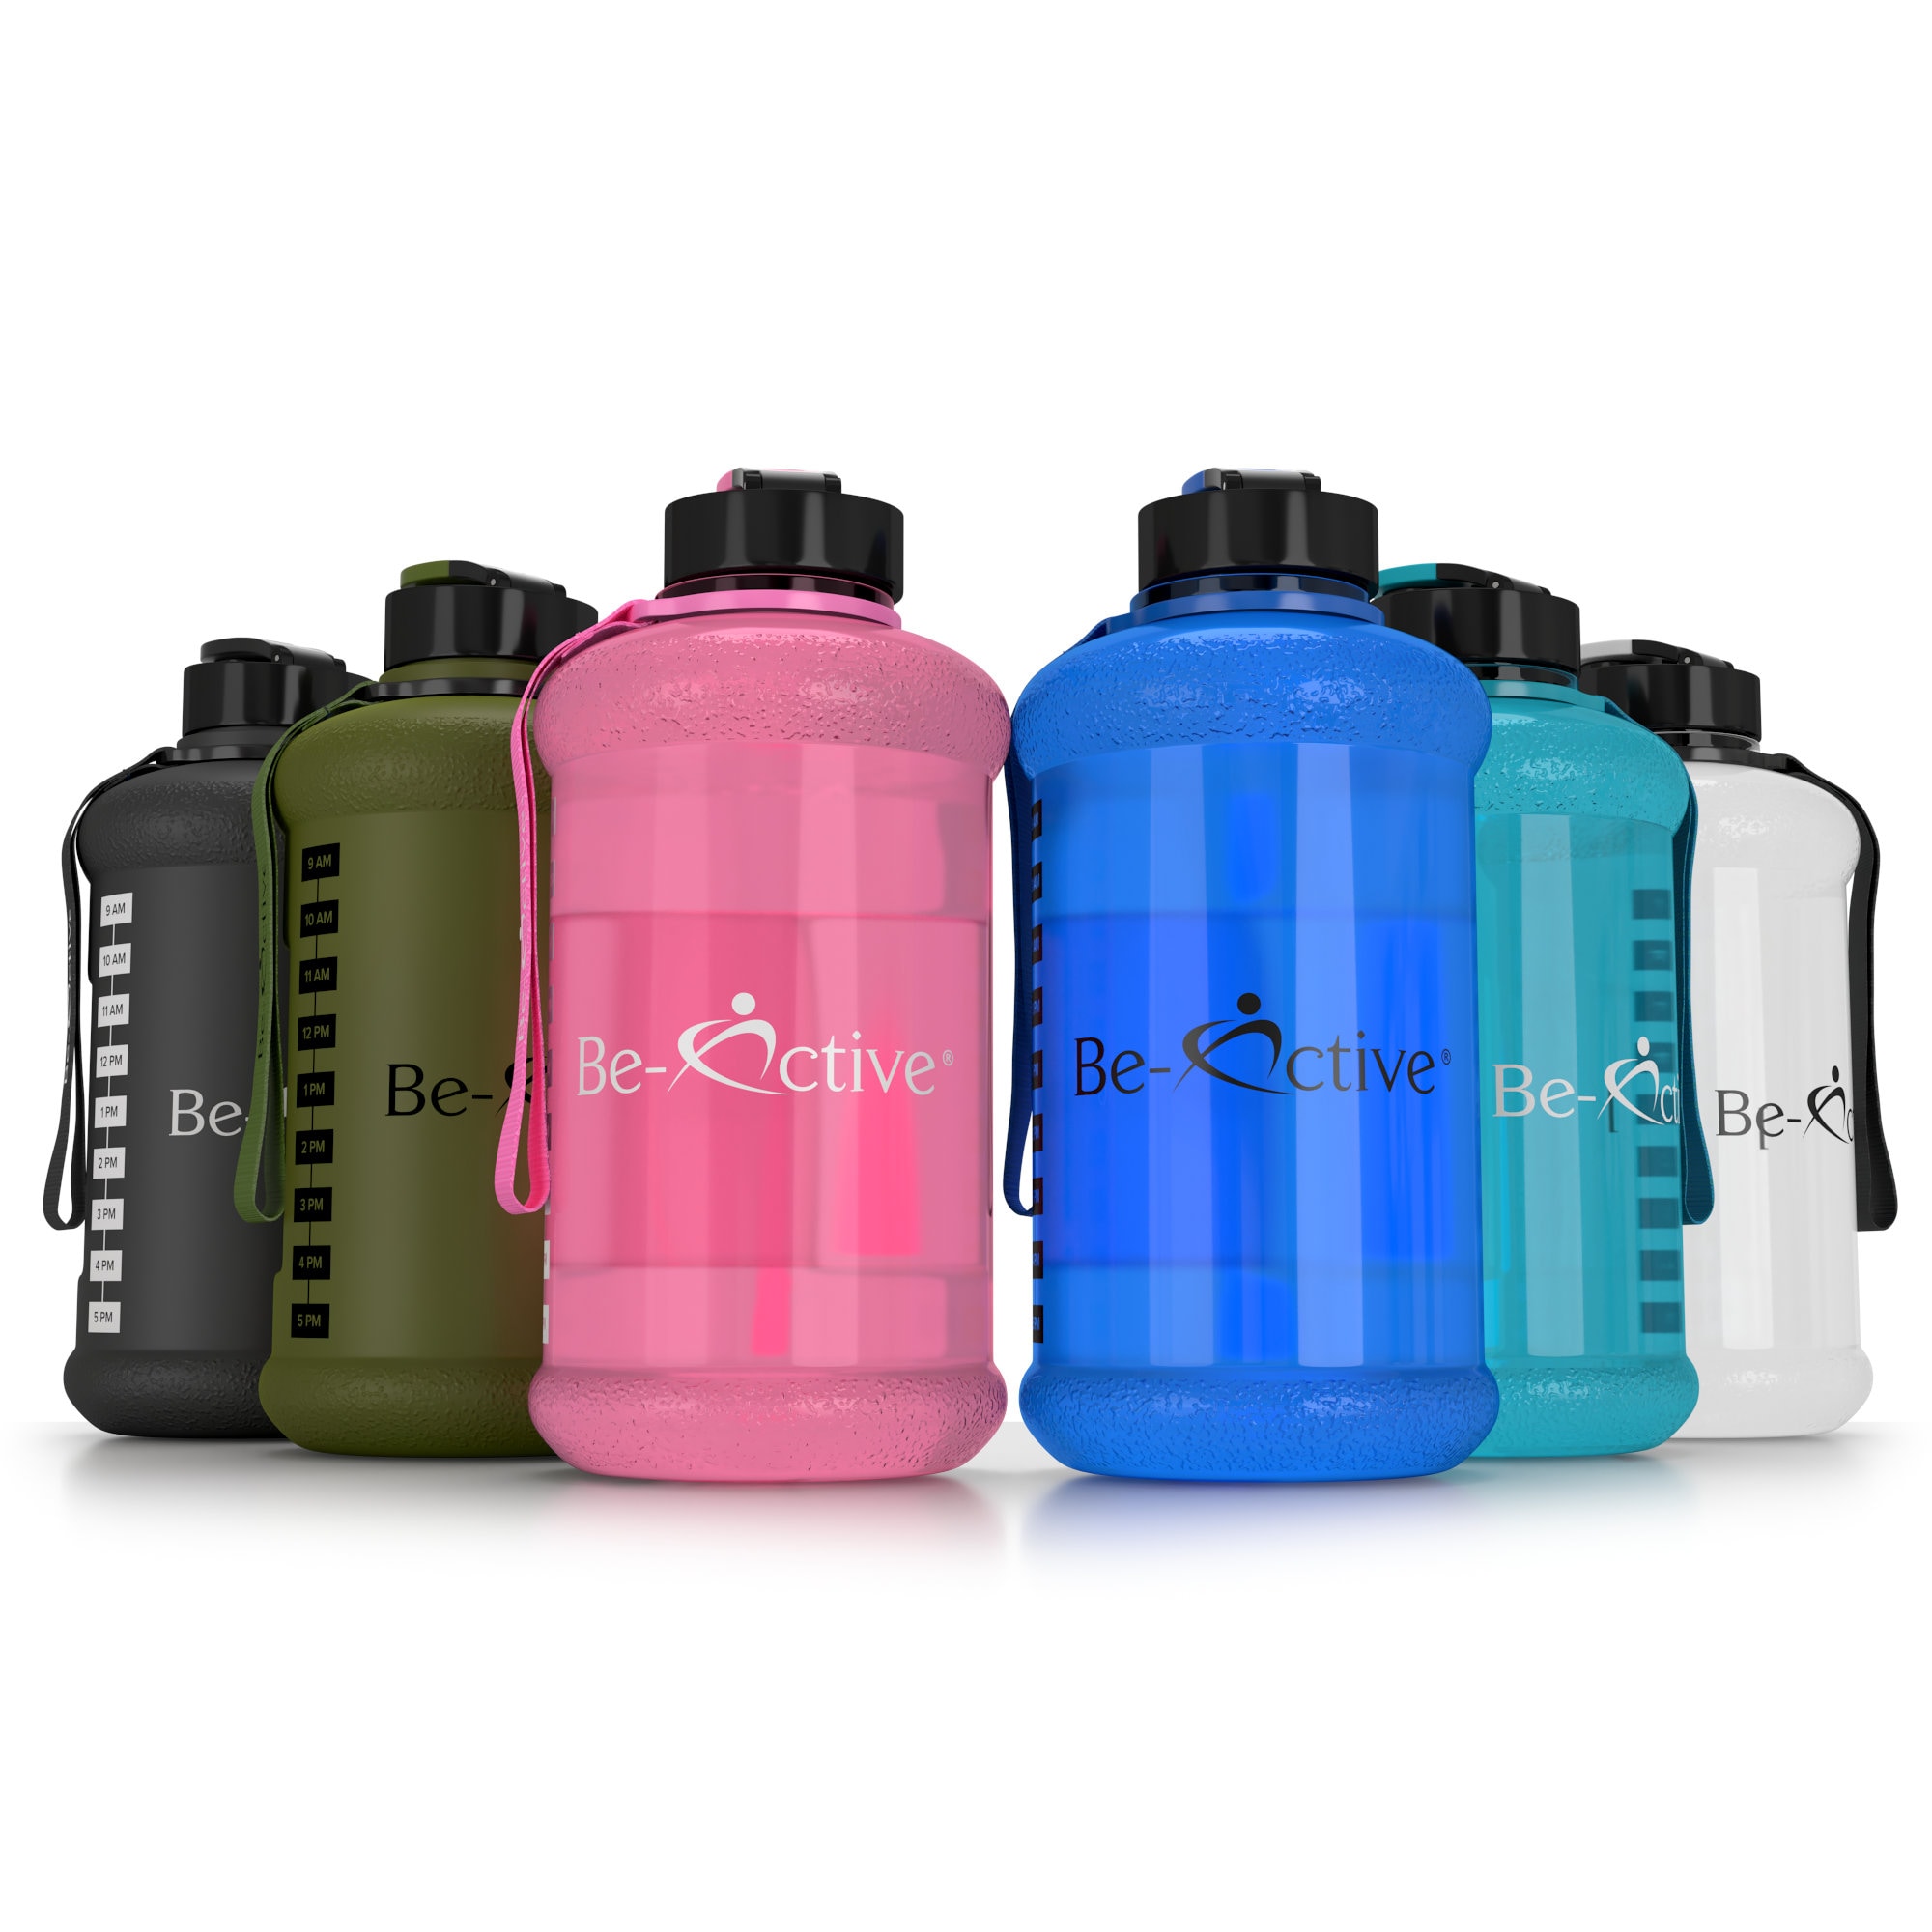 5 Gallon Crown Top Reusable Plastic Water Bottles Containers Jugs with Easy  Grip Handle for Home and Office, Tailgating, & Camping 2 PACK